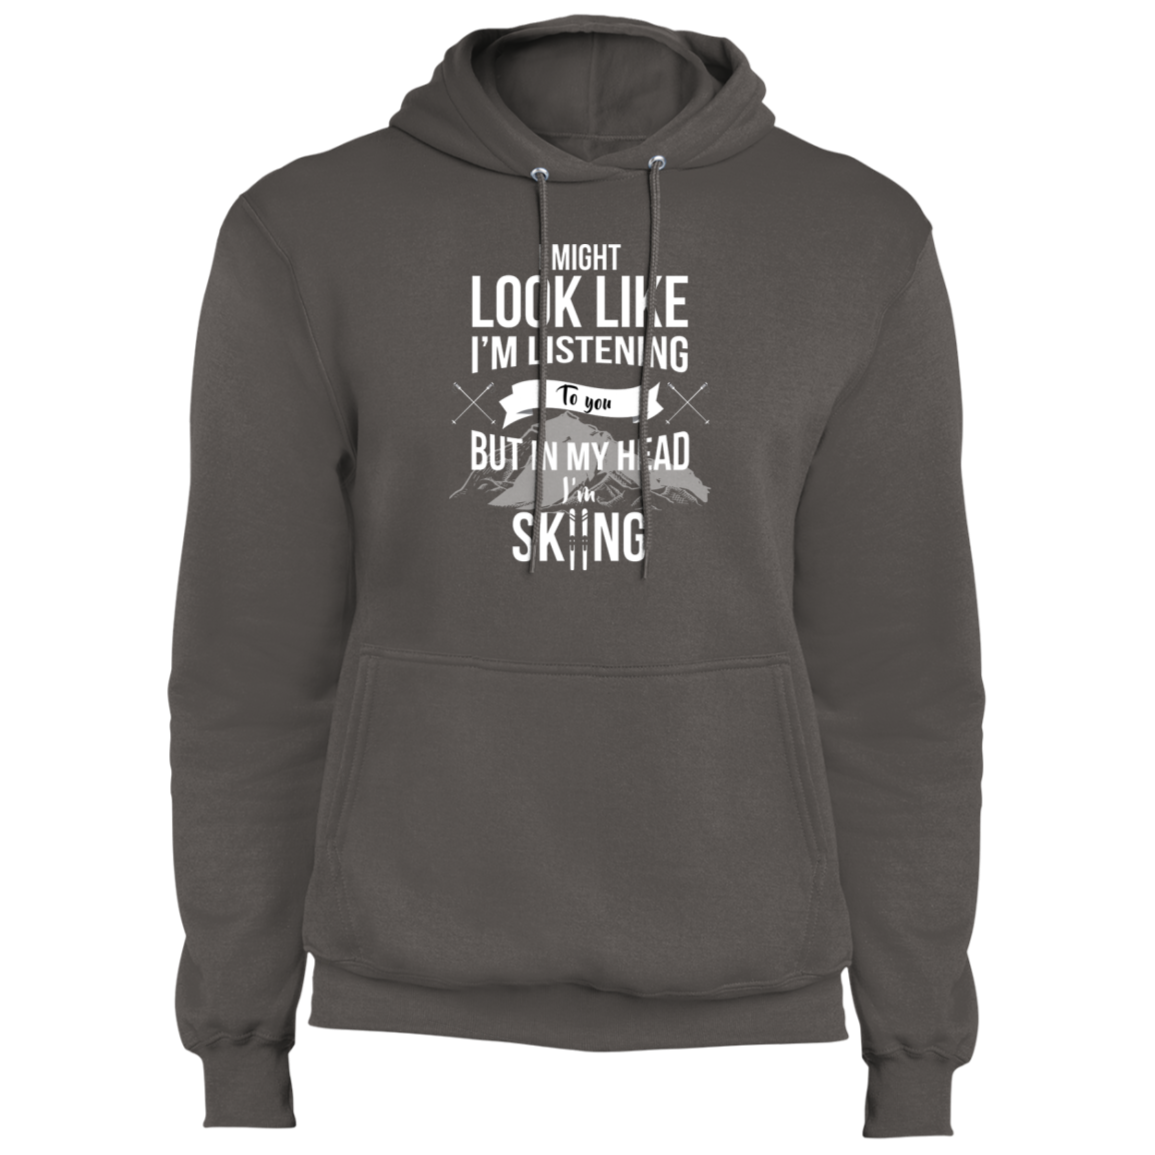 I Might Look Like I'm Listening To You but In My Head I'm Skiing Fleece Pullover Hoodie - Powderaddicts